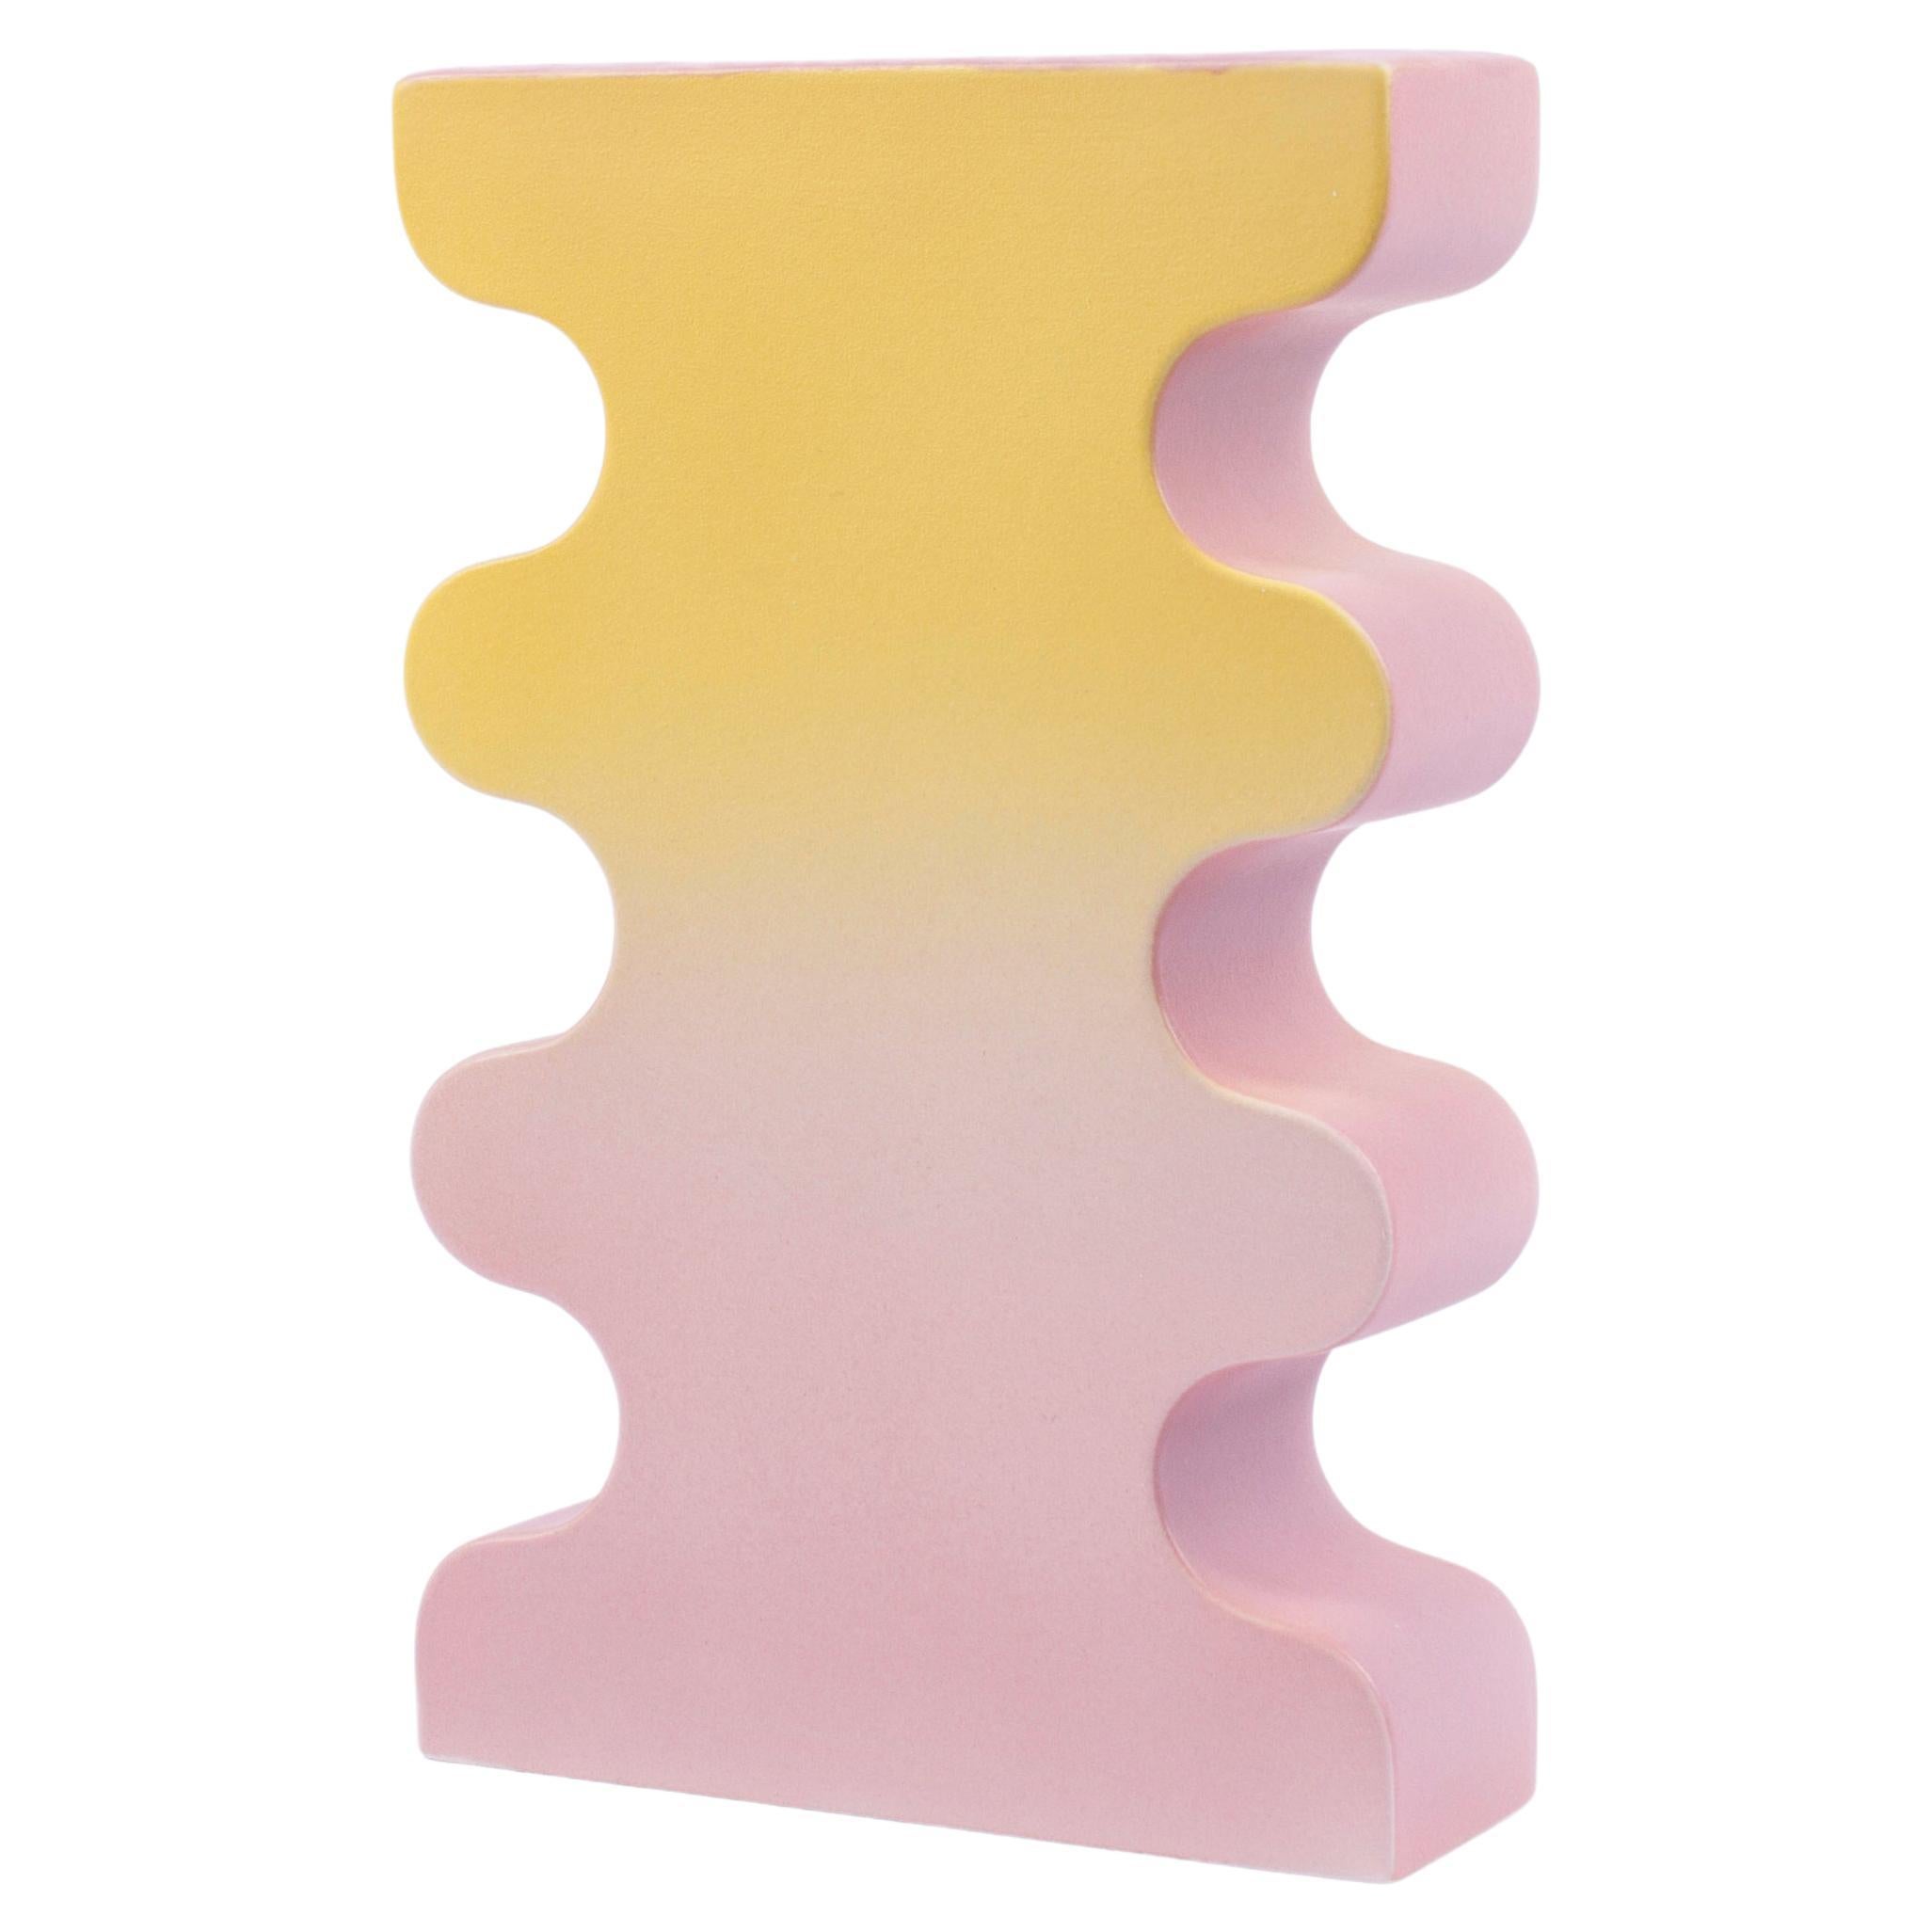 Contemporary Ceramic Vase 'Barva 4', Yellow + Pink For Sale